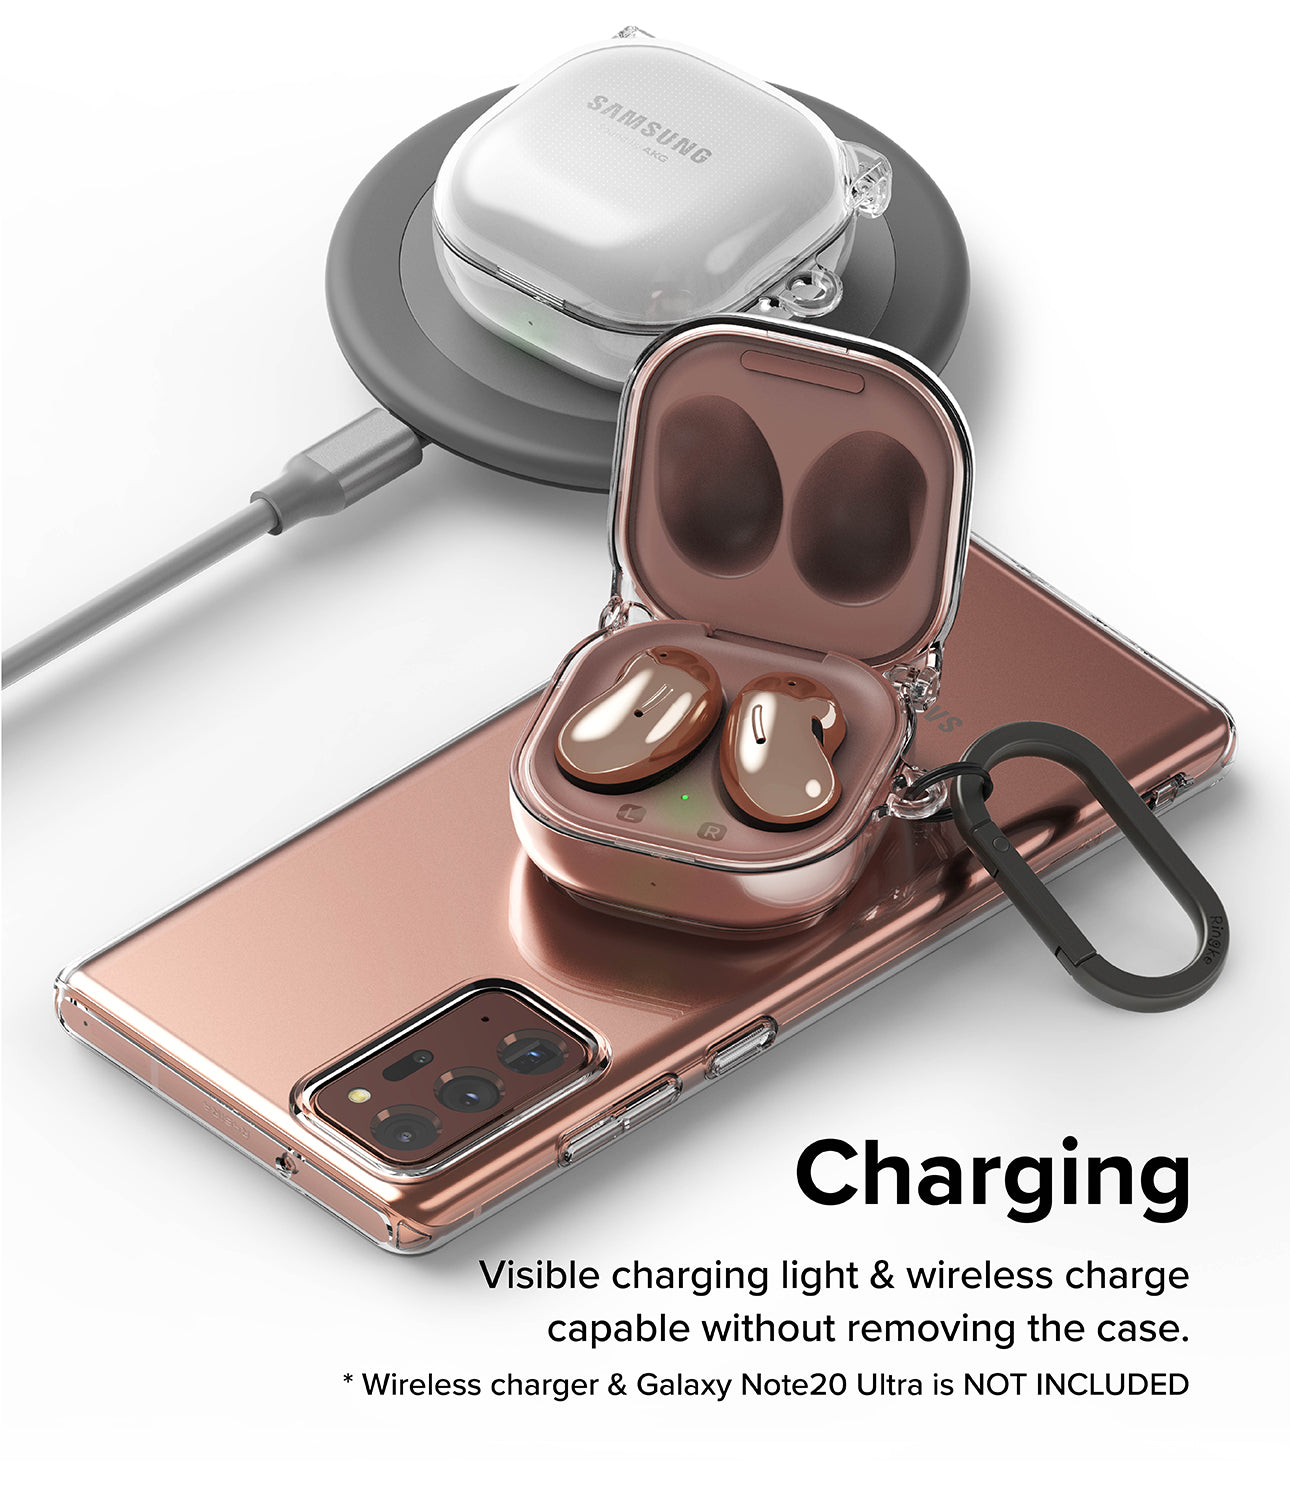 Galaxy Buds FE / 2 Pro / Buds 2 / Galaxy Buds Pro / Live Case | Hinge - Charging. Visible charging light & wireless charge capable without removing the case. Wireless charger is not included.